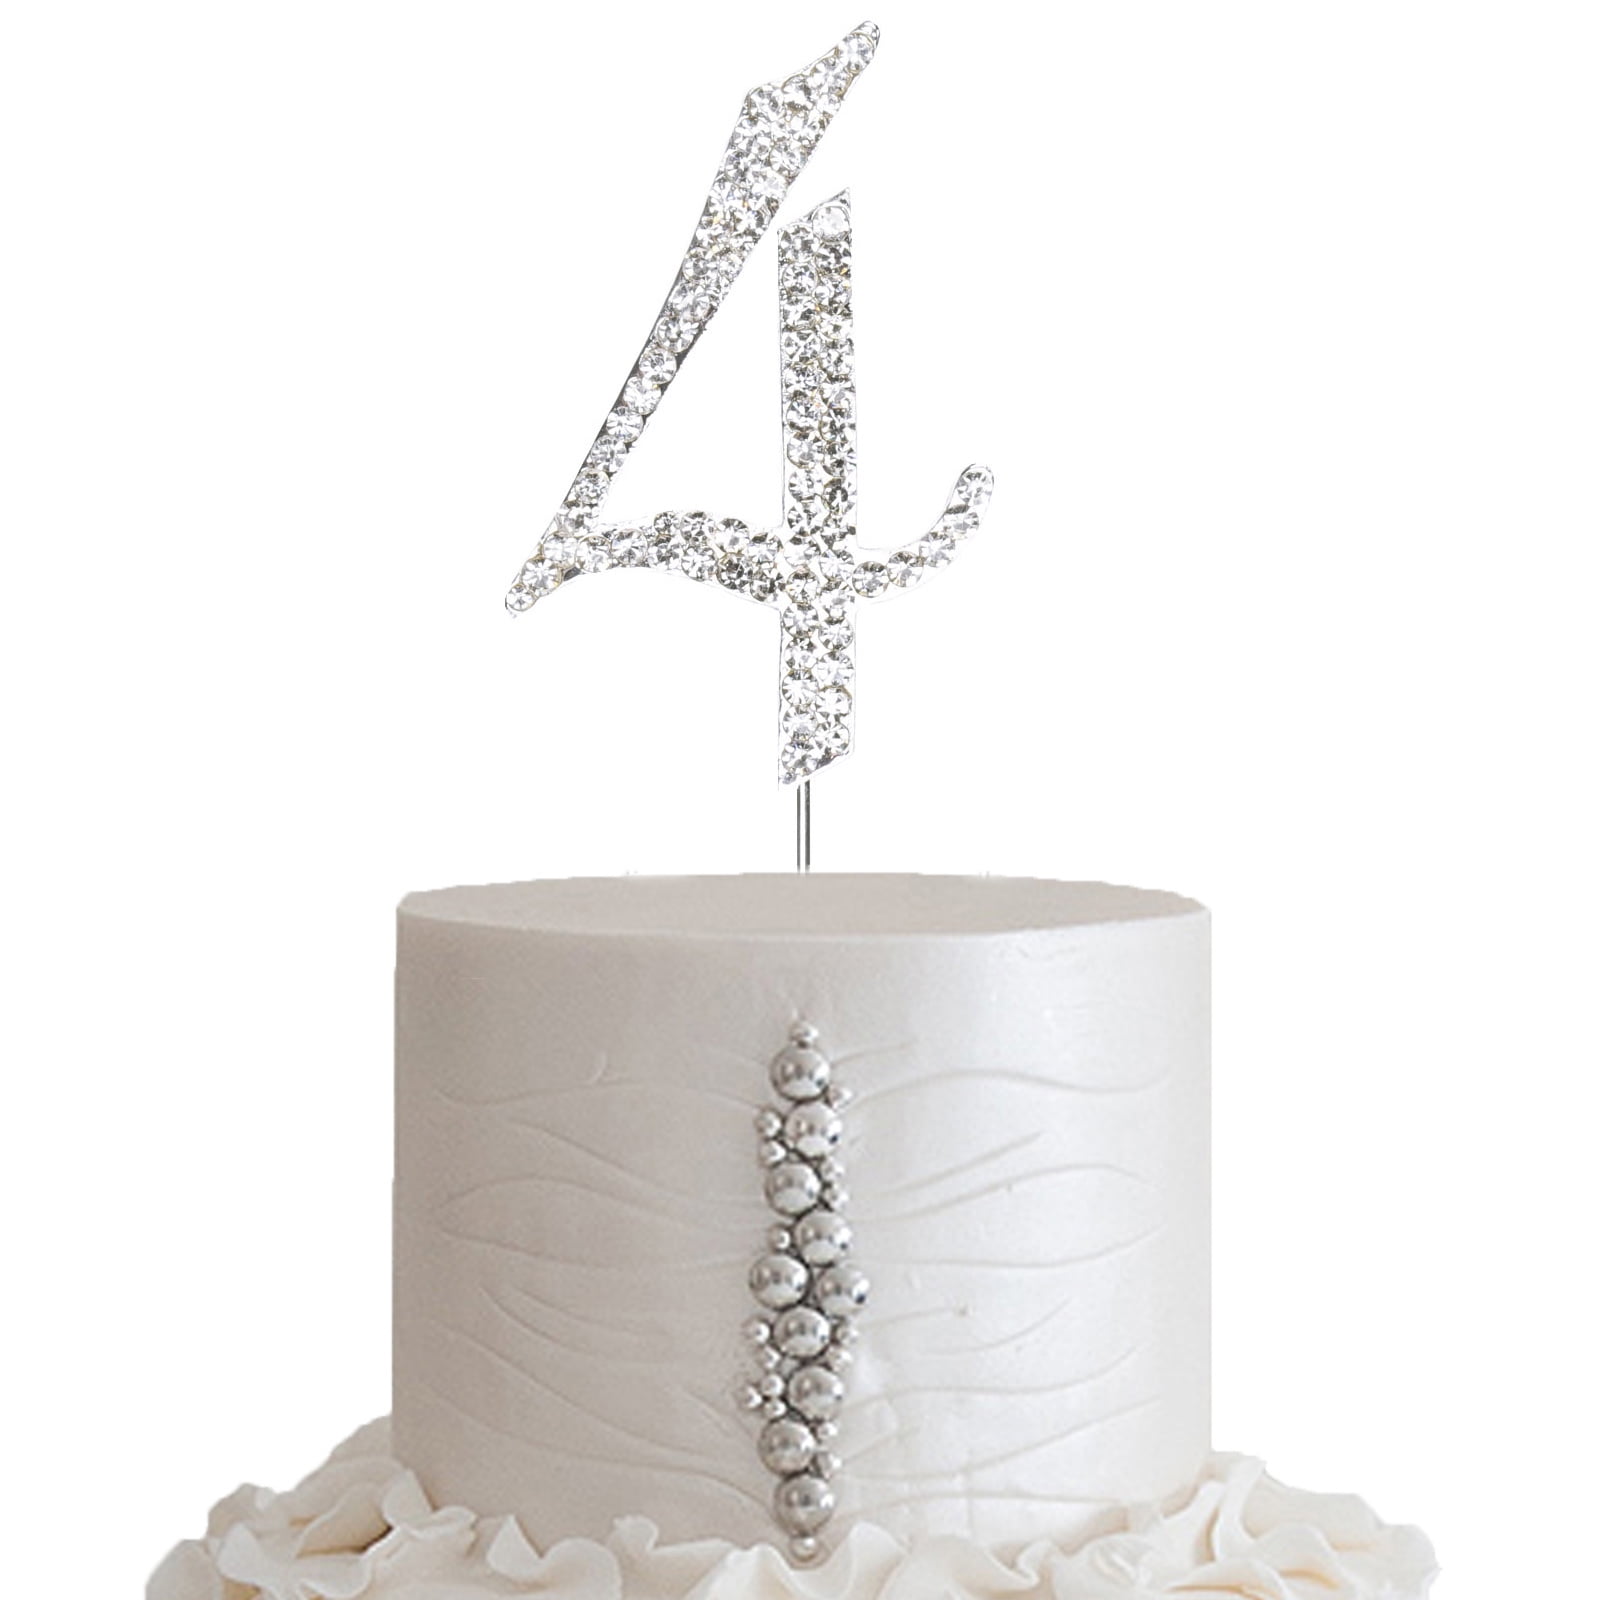 2.5" Tall Letter R Bling Rhinestone  Wedding Party Cake Topper 